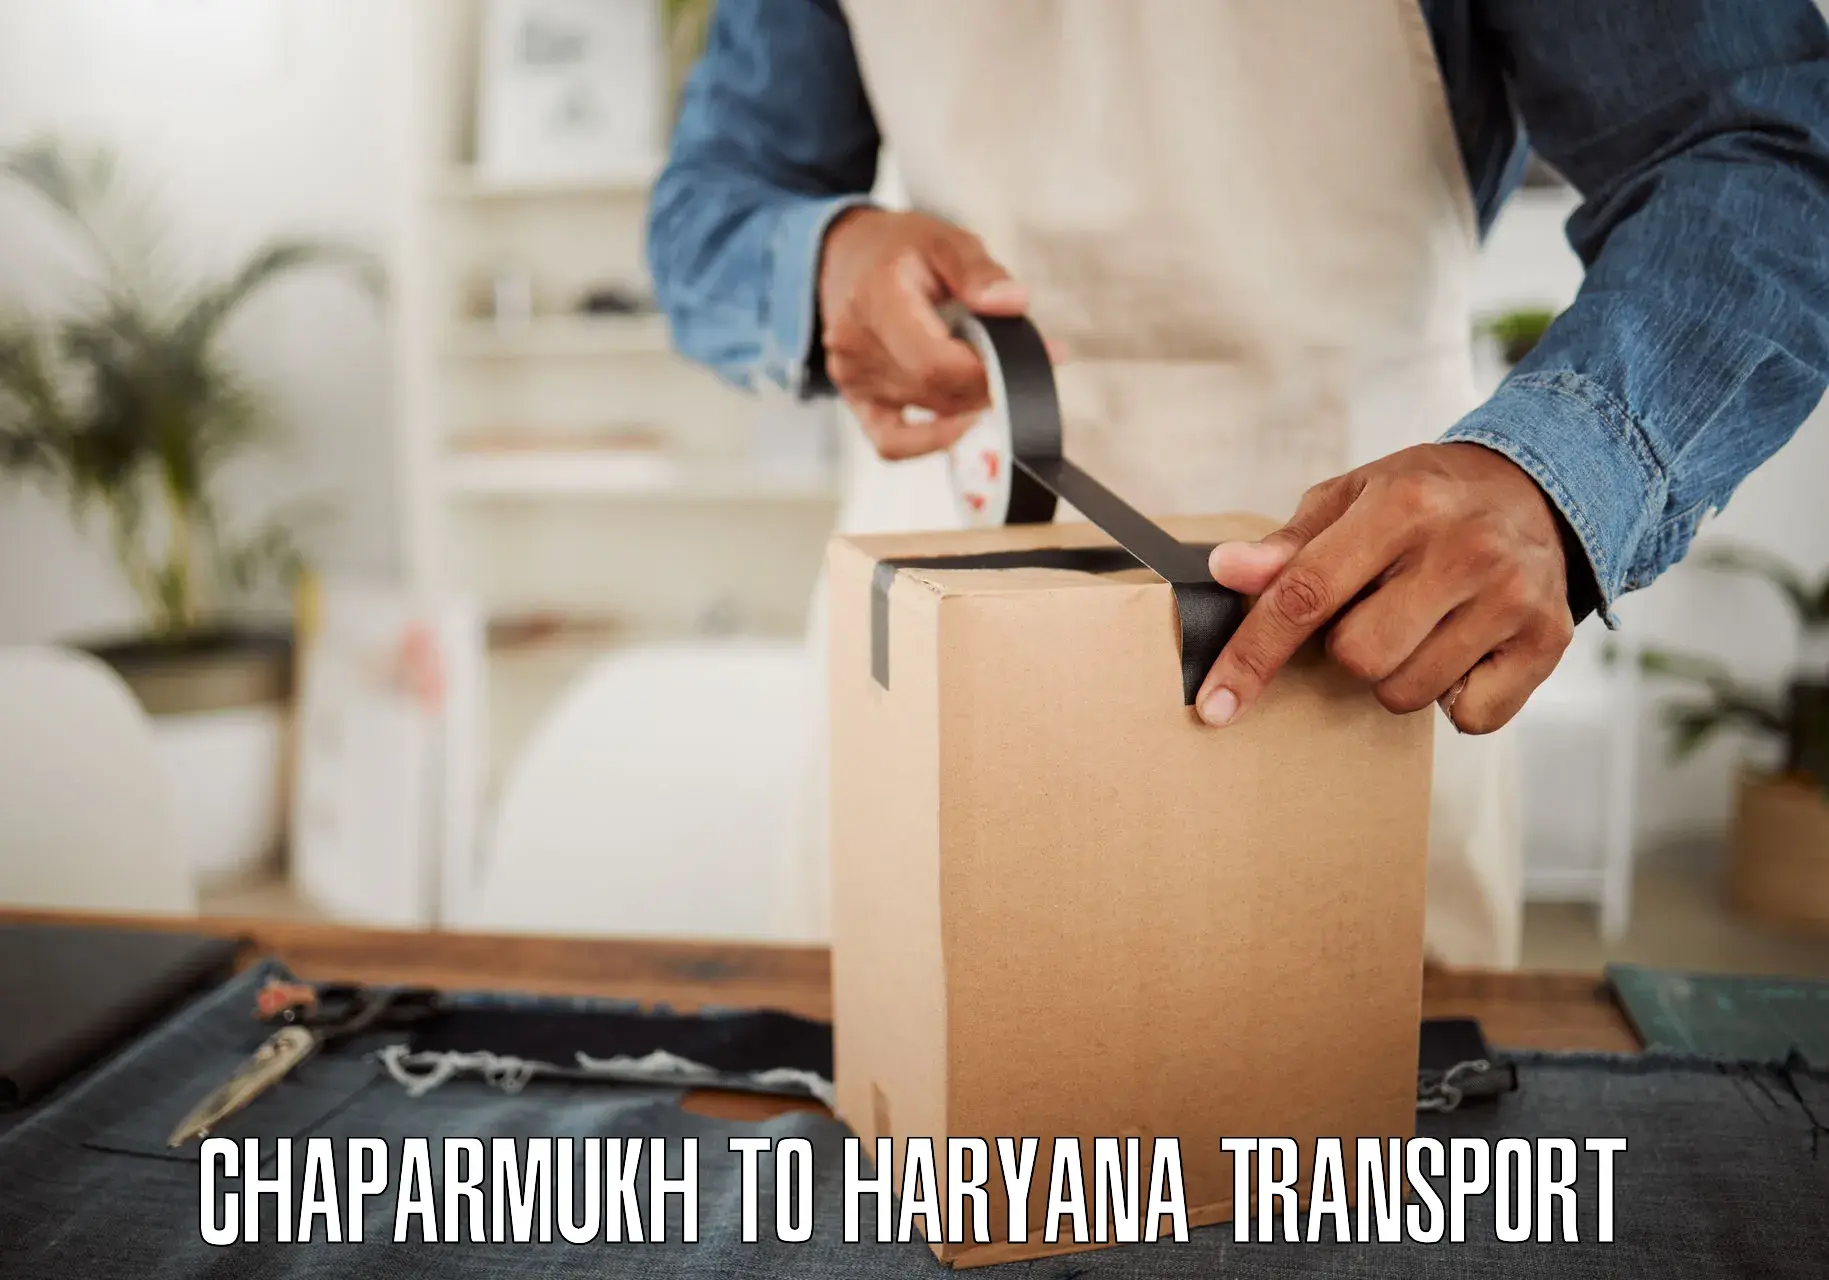 Goods delivery service Chaparmukh to Bilaspur Haryana